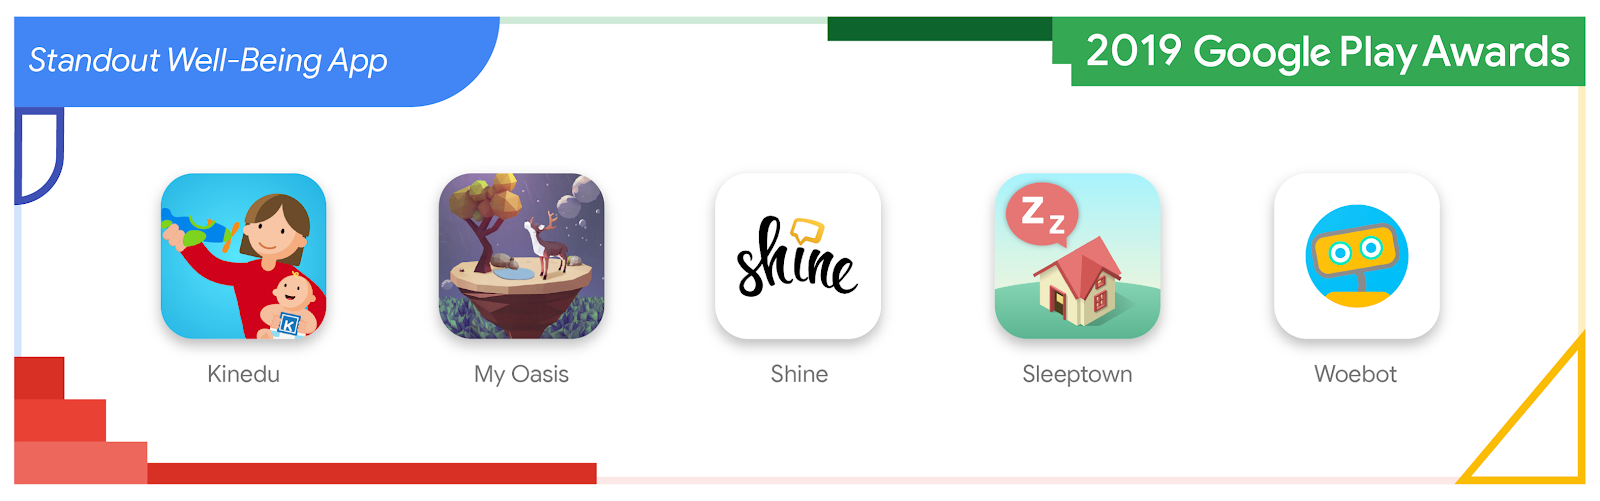 Logos of the Standout Well-Being App category nominees